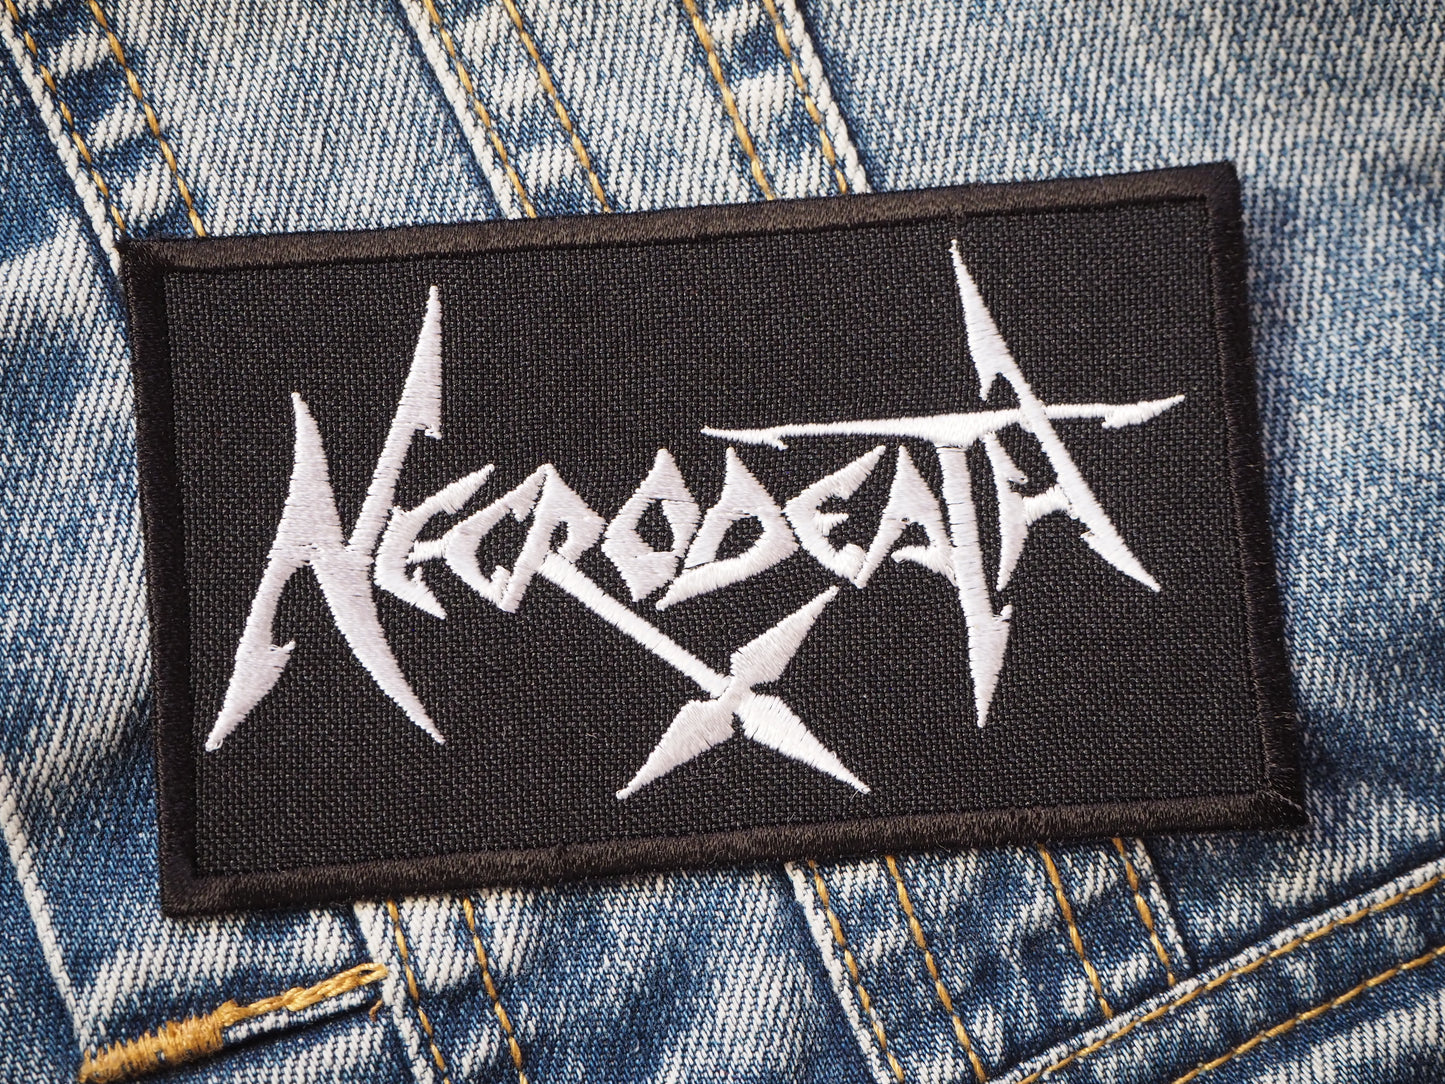 Necrоdeath Patch